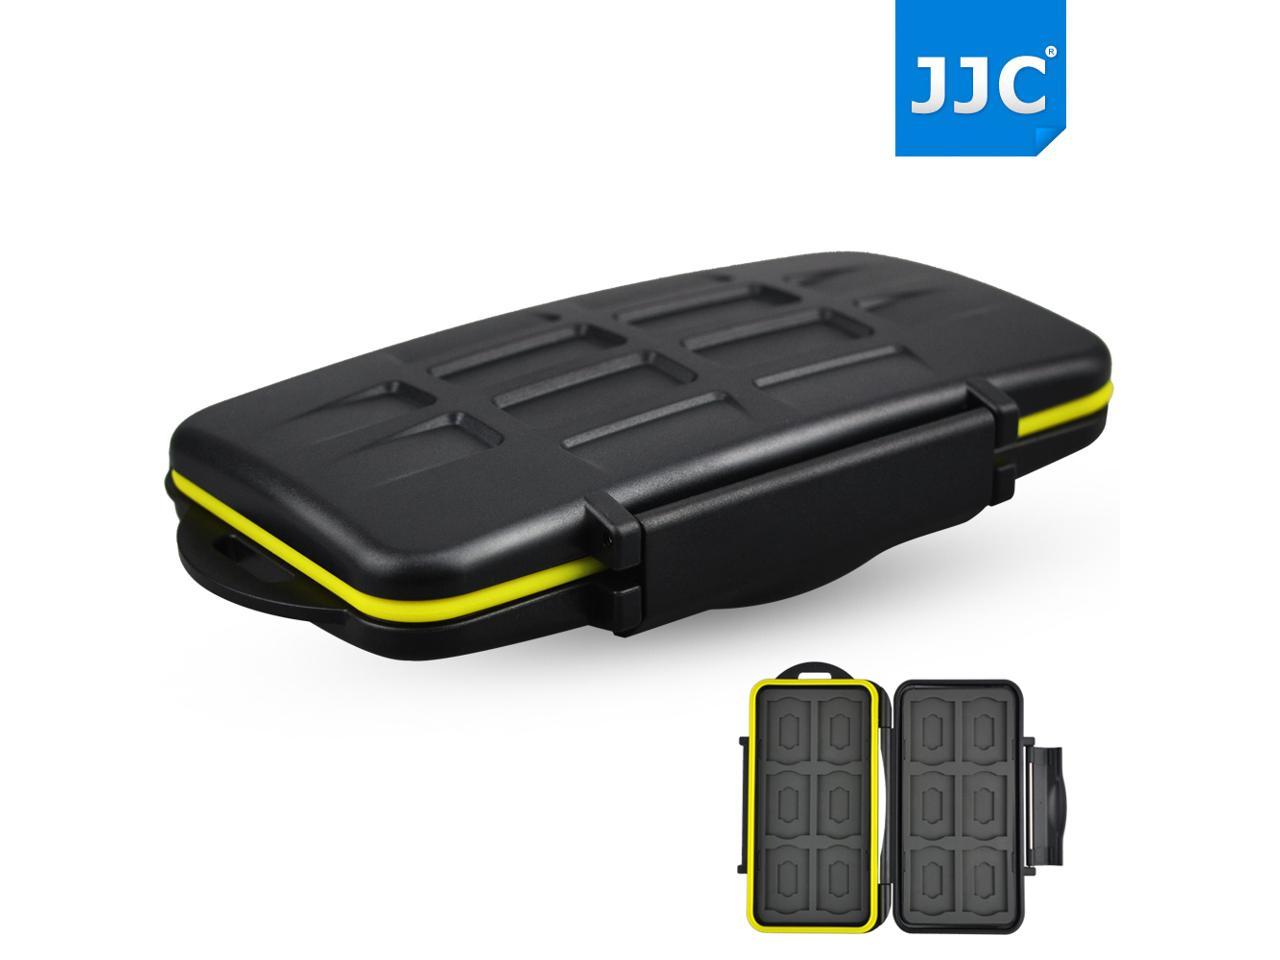 JJC Water-resistant Shockproof SD Card Holder Storage Camera Memory Card Bag Case Protector Cover For 12 SD+12 Micro SD Cards